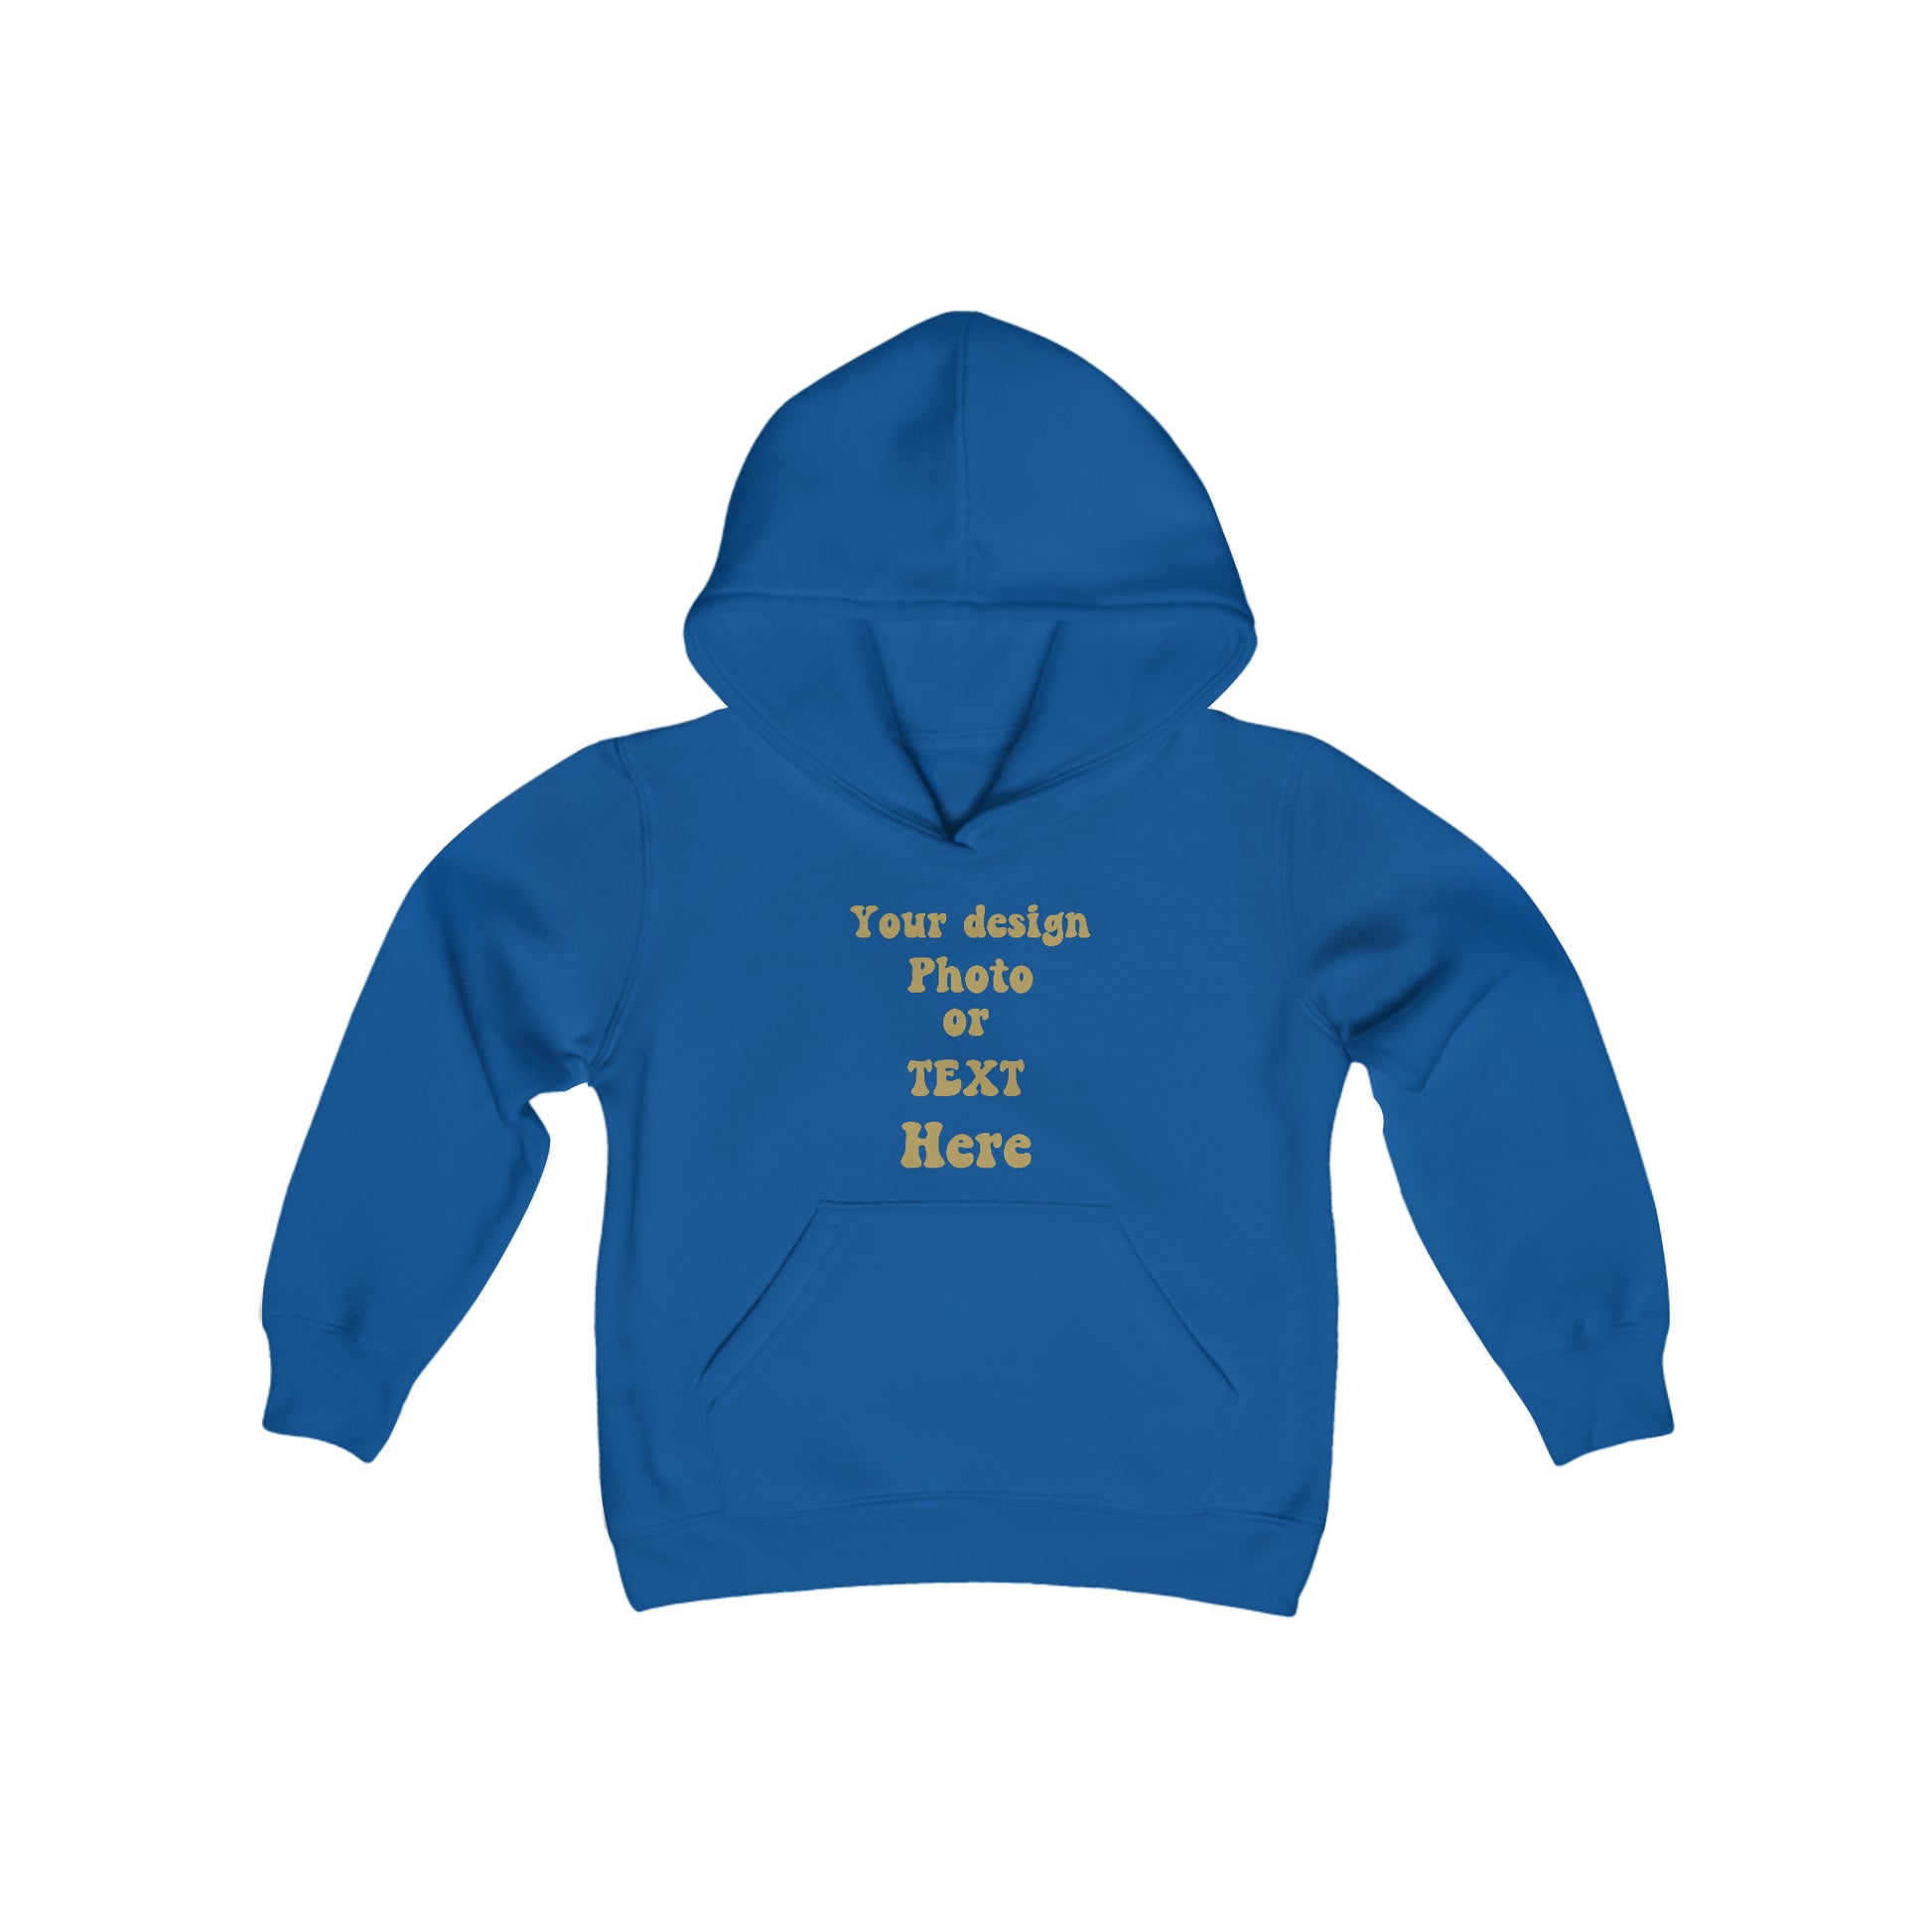 Youth Heavy Blend Hooded Sweatshirt - Personalize It with Text and Photo Kids clothes Royal S 